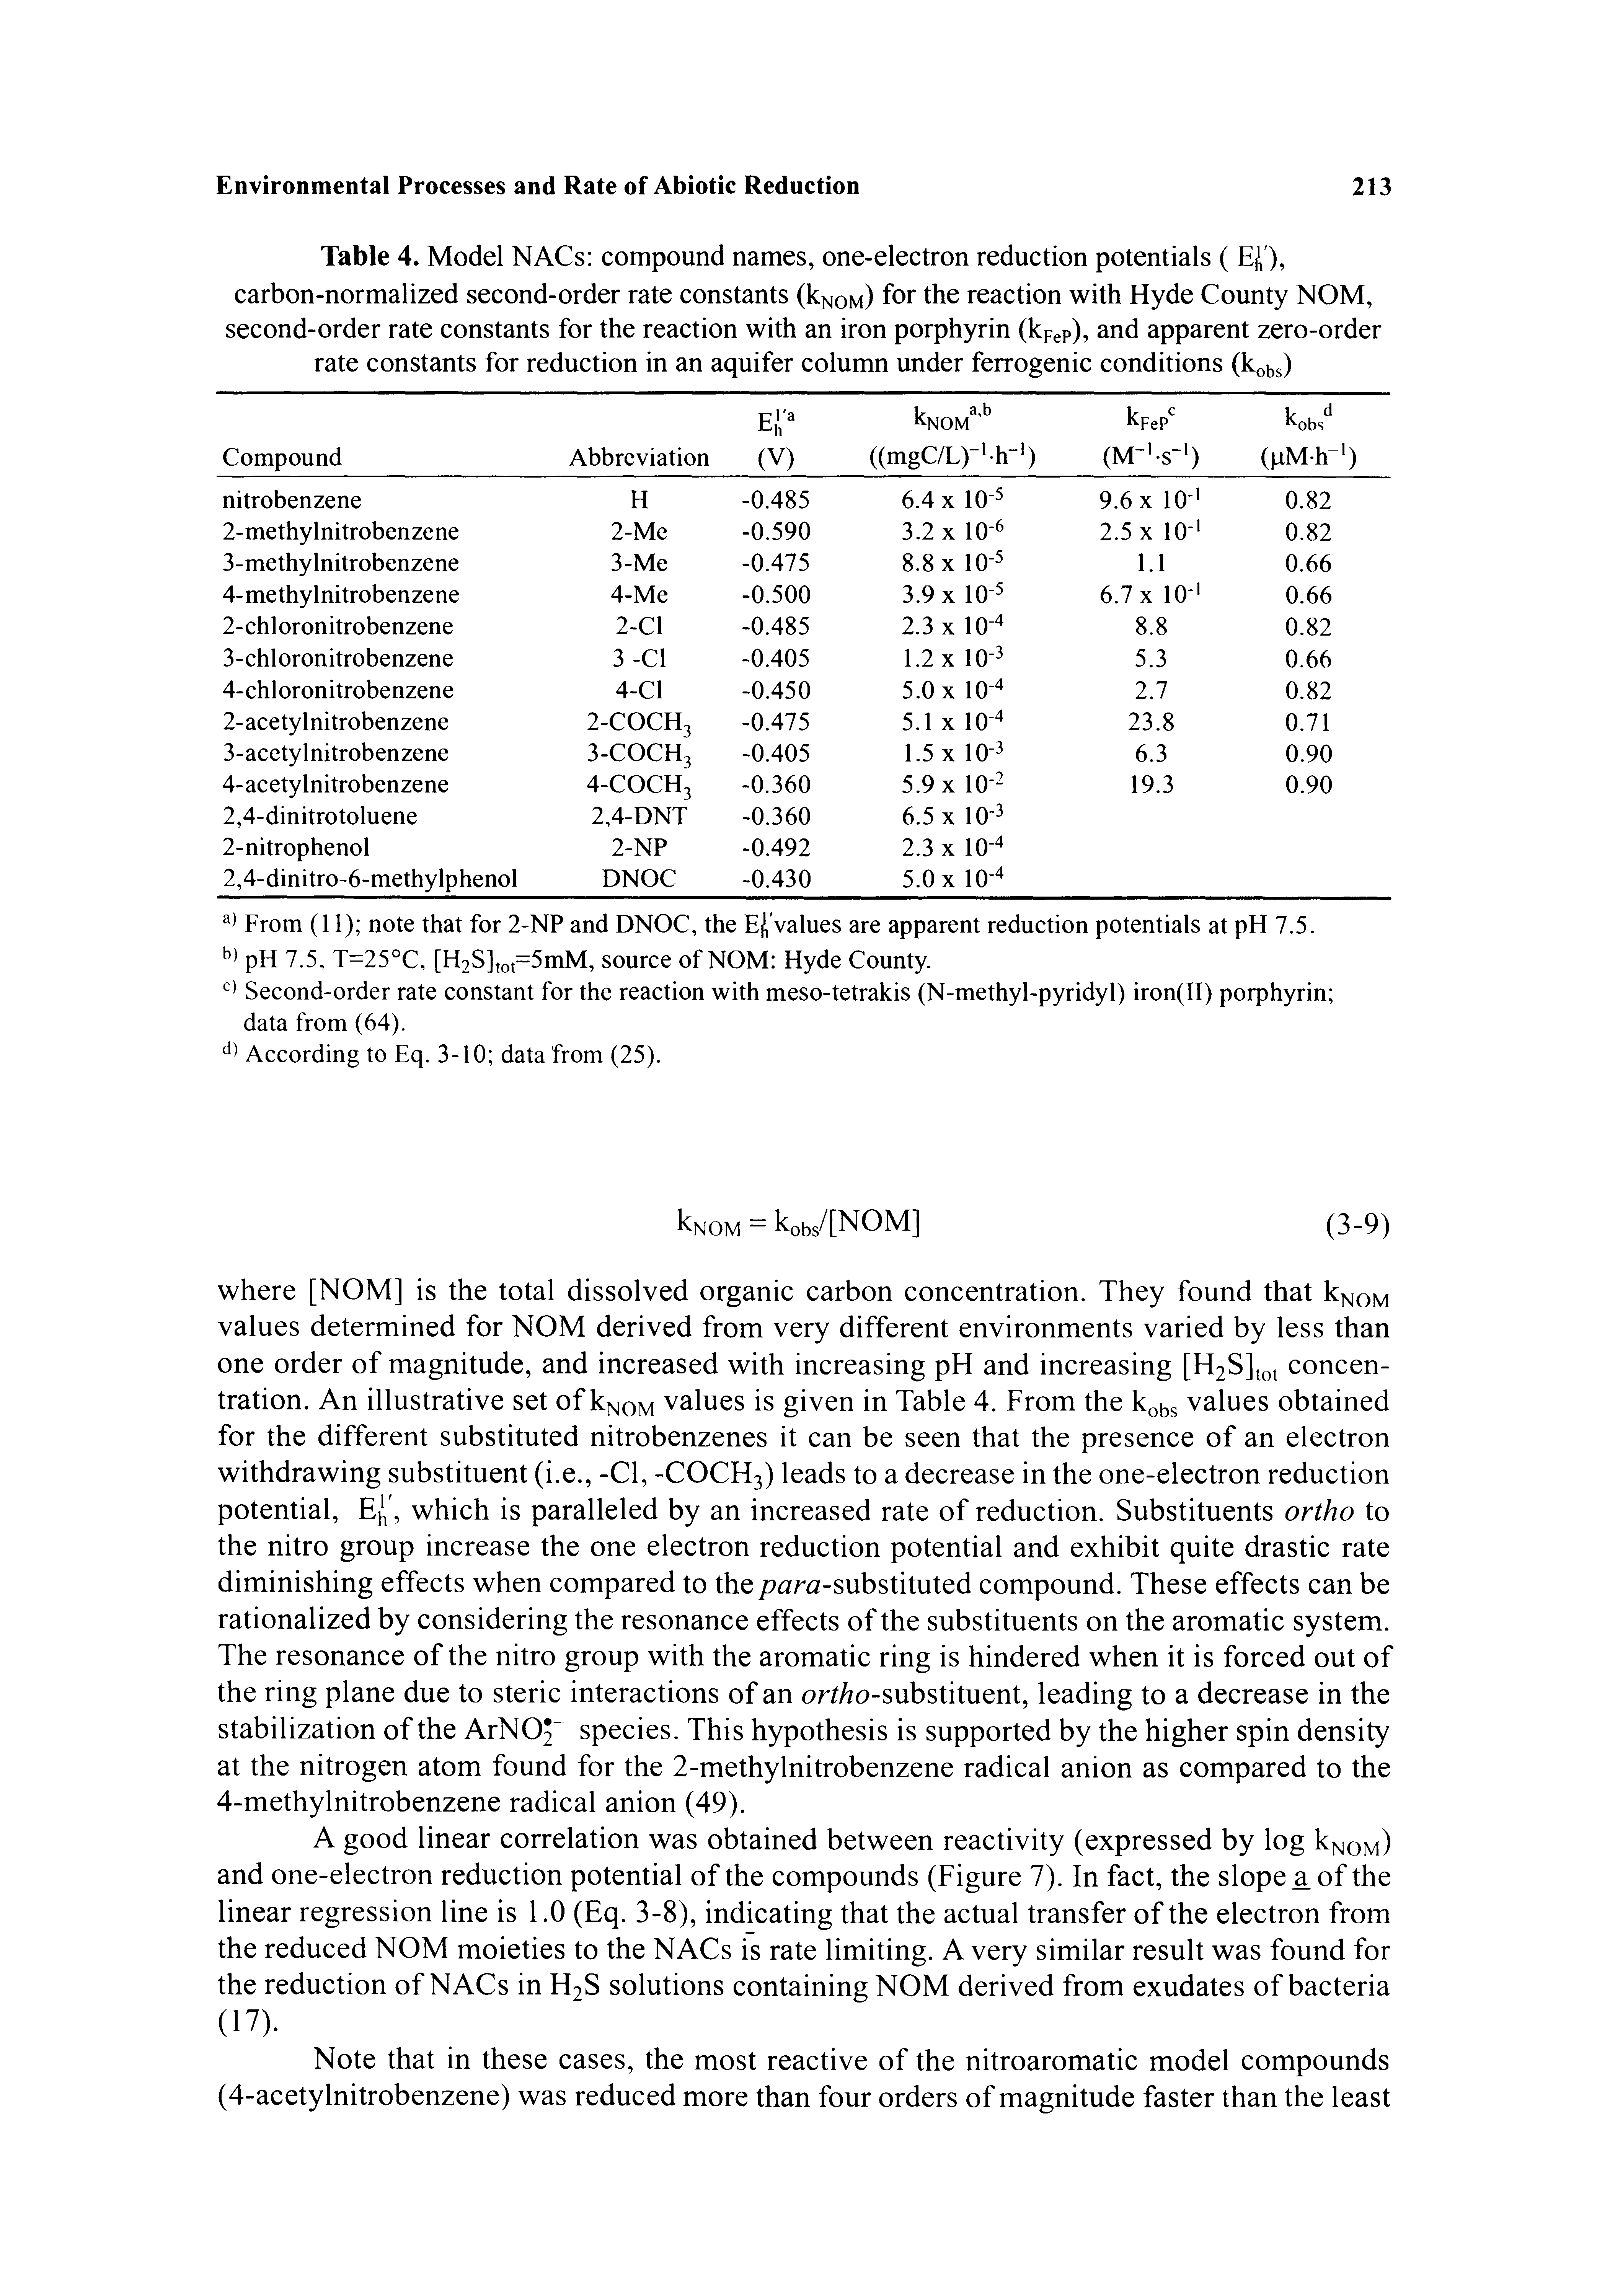 Table 4. Model NACs compound names, one-electron reduction potentials ( EJO, carbon-normalized second-order rate constants (Icnom) for the reaction with Hyde County NOM, second-order rate constants for the reaction with an iron porphyrin (kpep), and apparent zero-order rate constants for reduction in an aquifer column under ferrogenic conditions (k bs)...